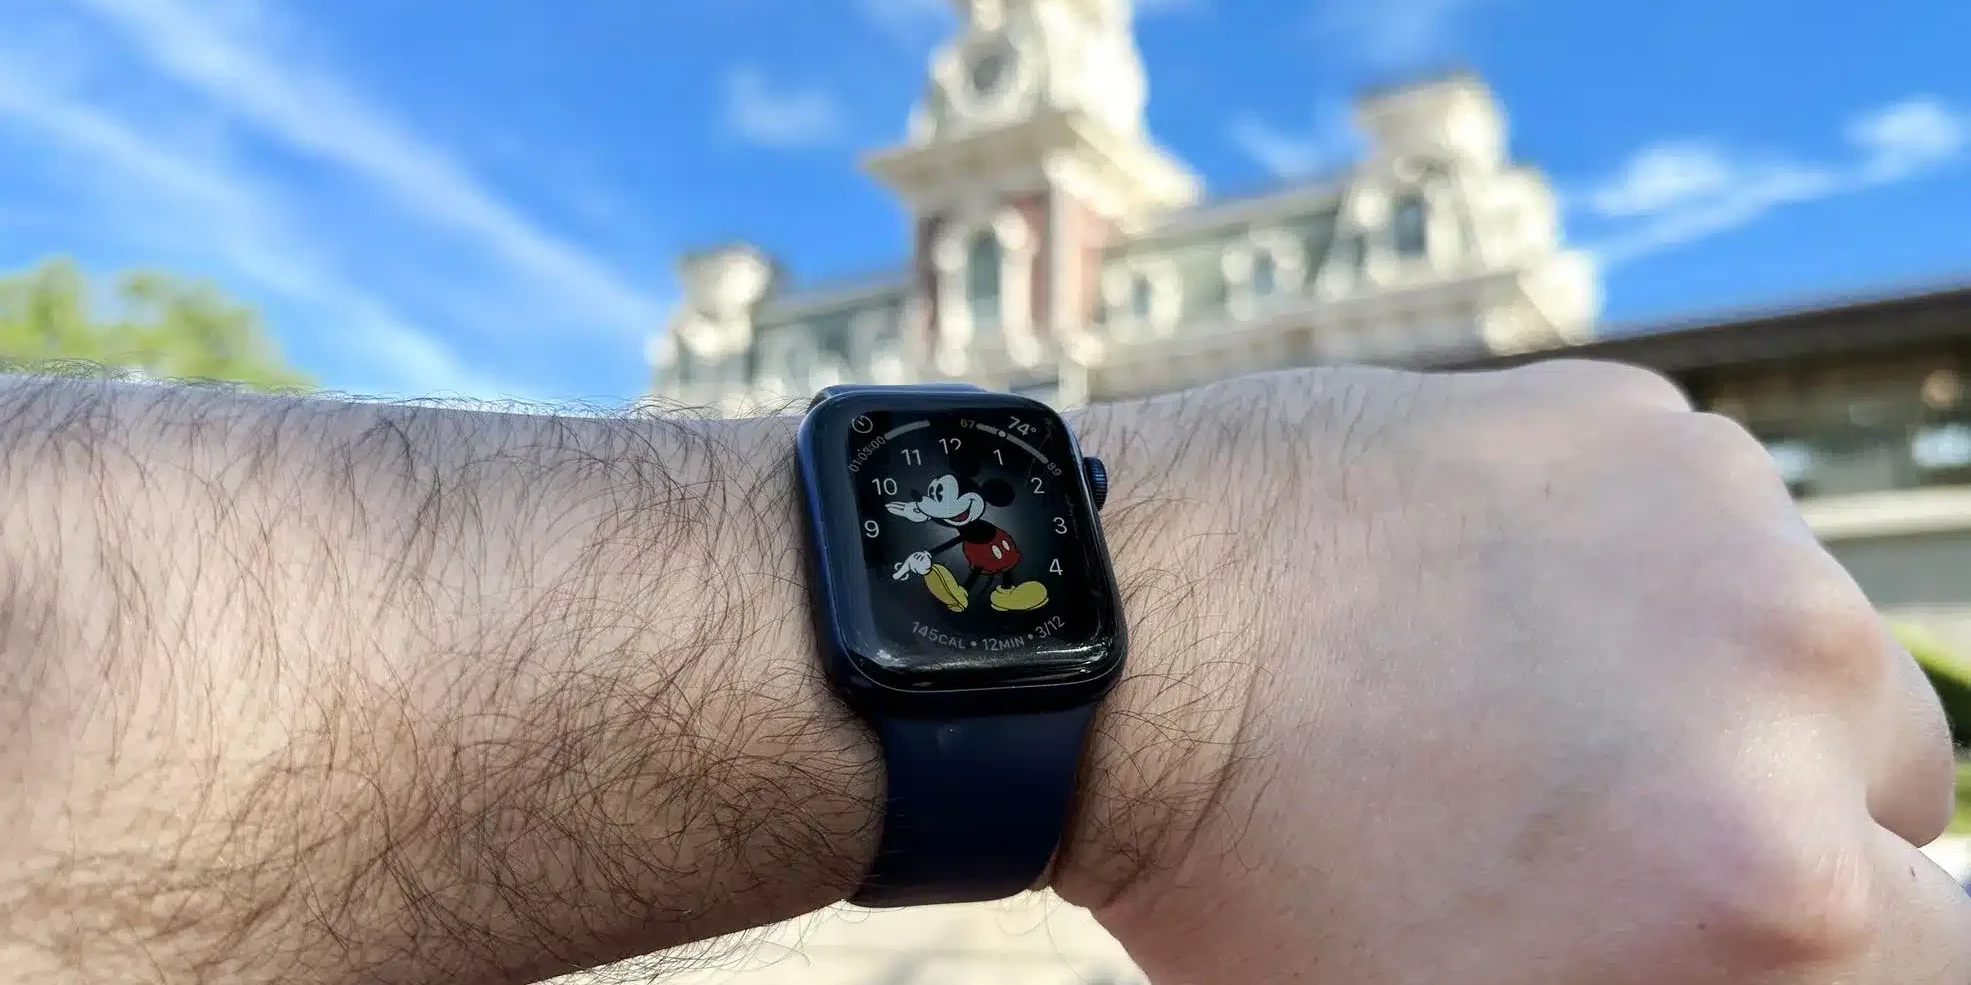 Wearing an Apple Watch at Disney World in front of the Magic Kingdom Train Station - Guide2WDW